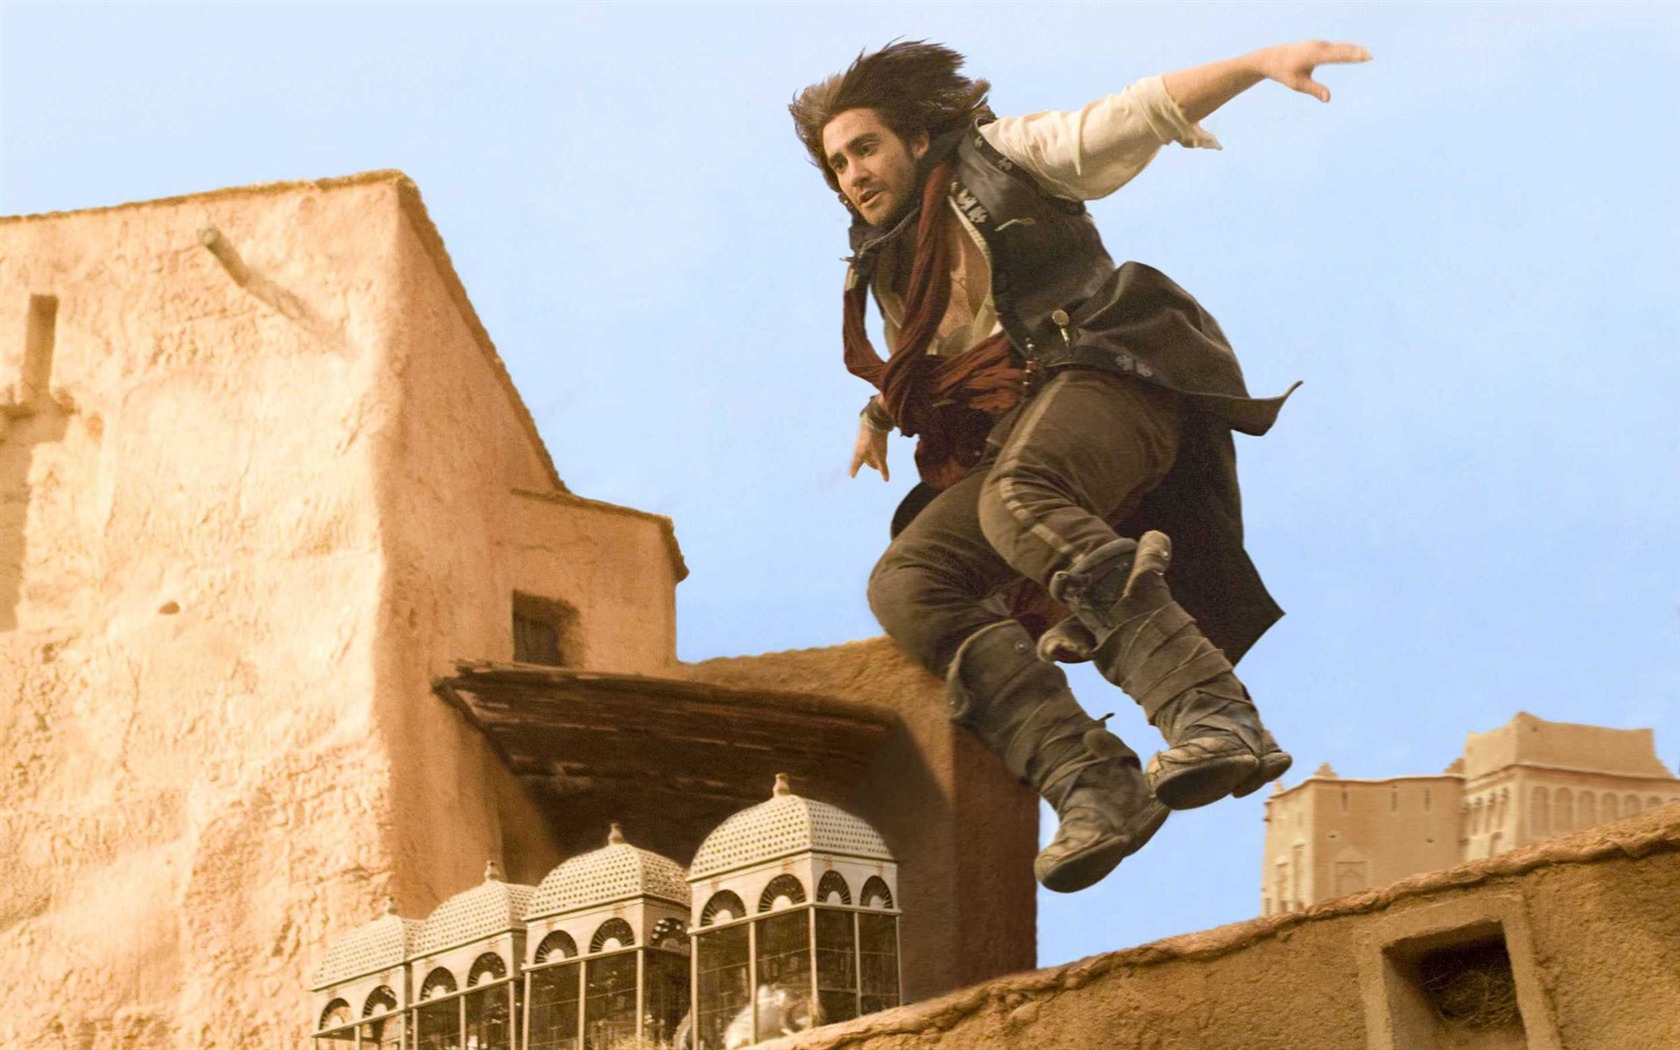 Prince of Persia The Sands of Time 波斯王子：時之刃 #12 - 1680x1050